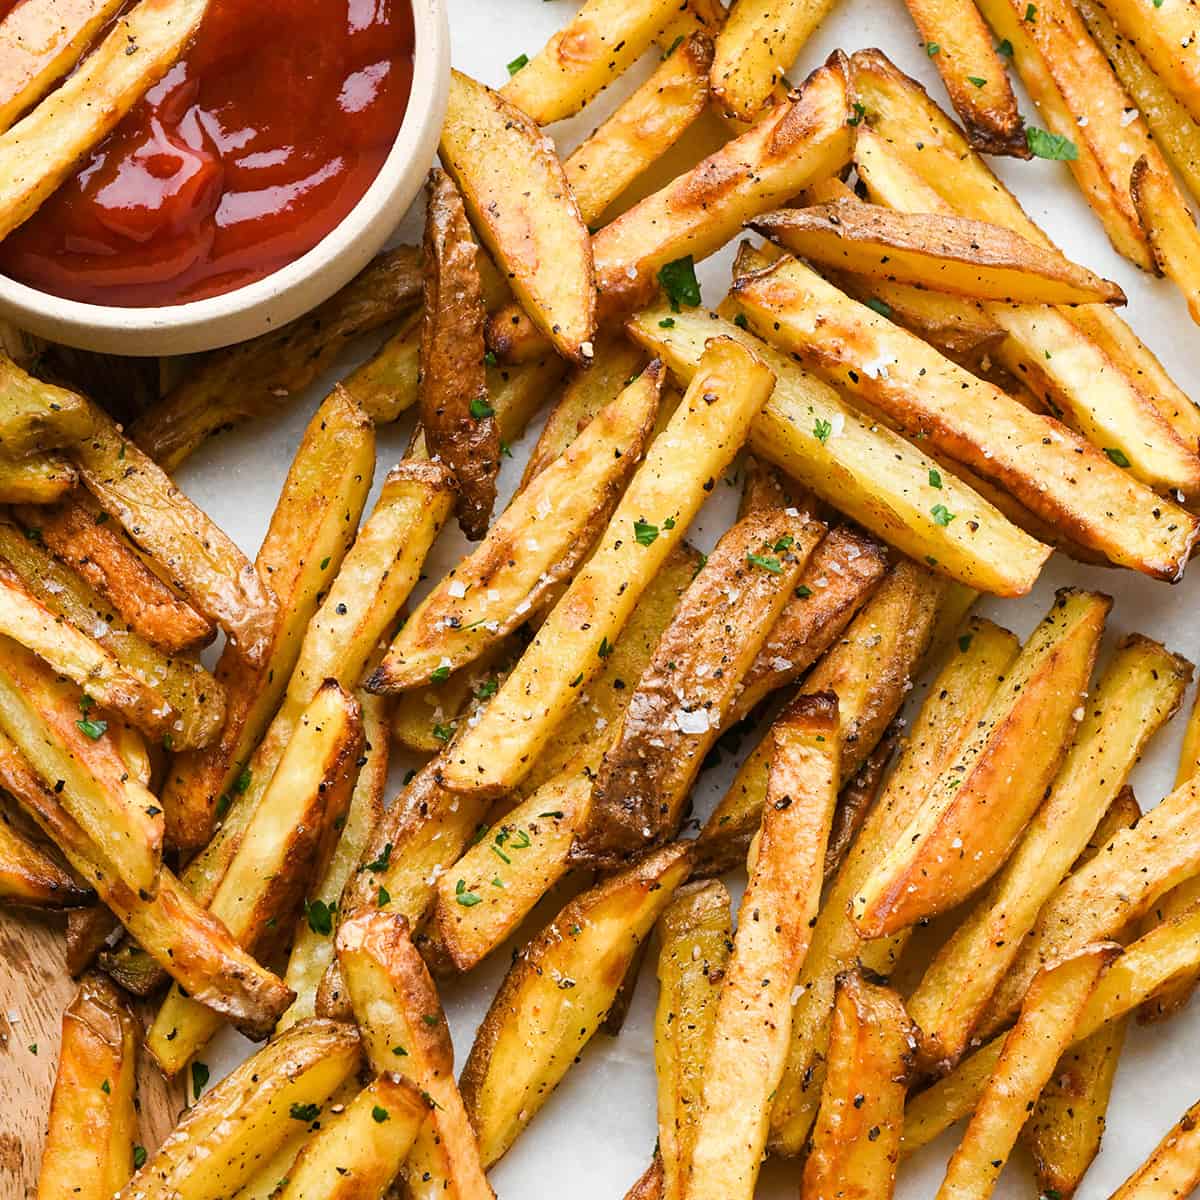 Homemade Baked French Fries on a plate with a bowl of ketchup